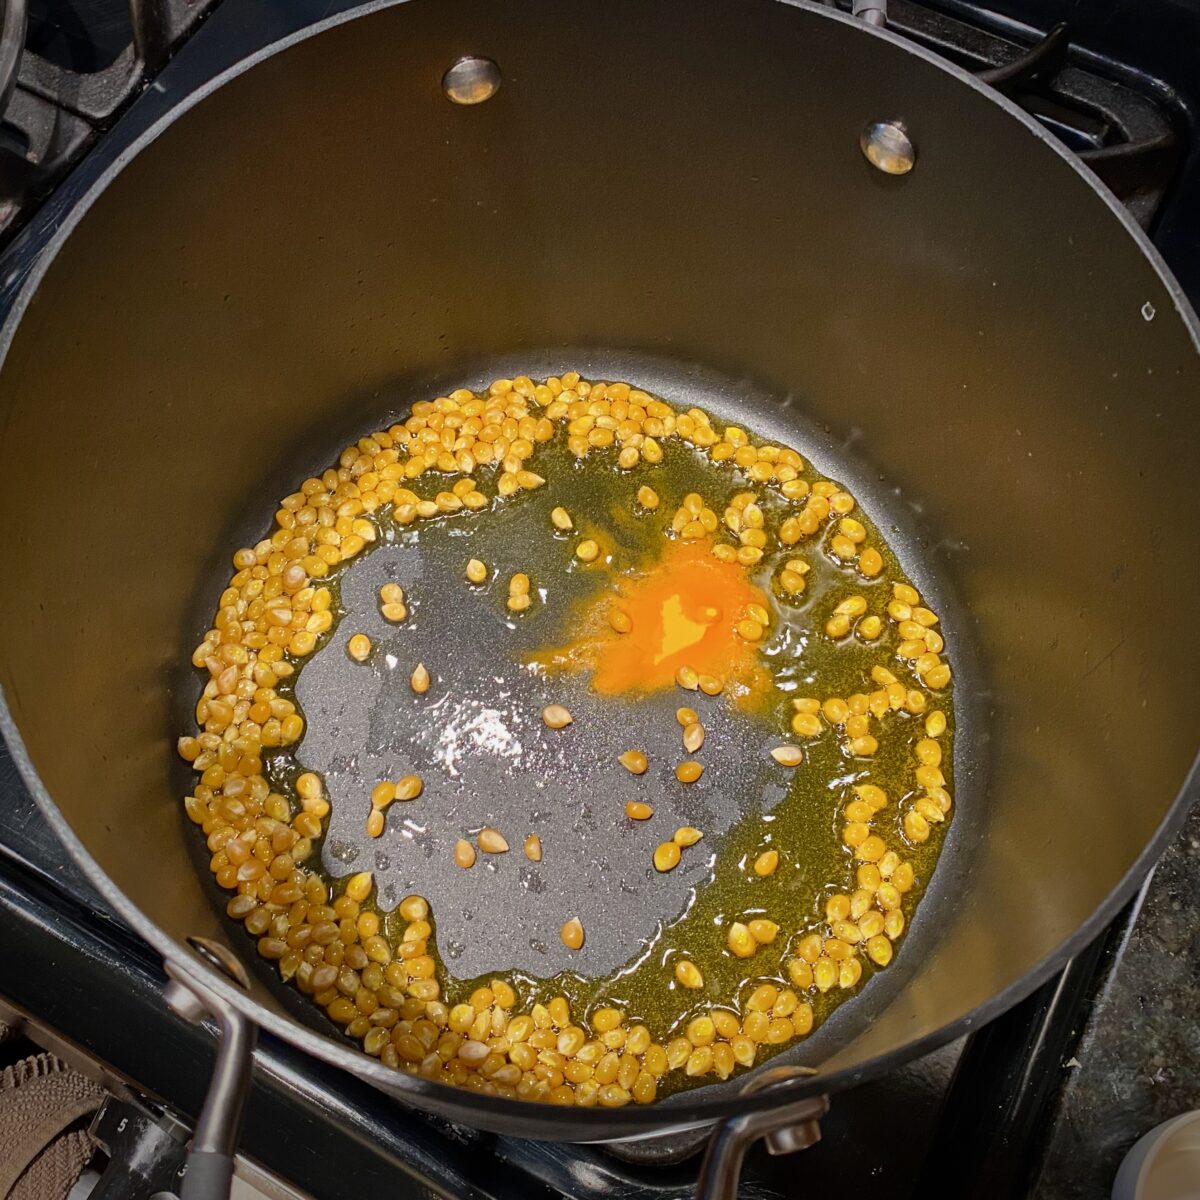 Top view of popcorn, Flavacol salt and oil sizzling in a hot pan.